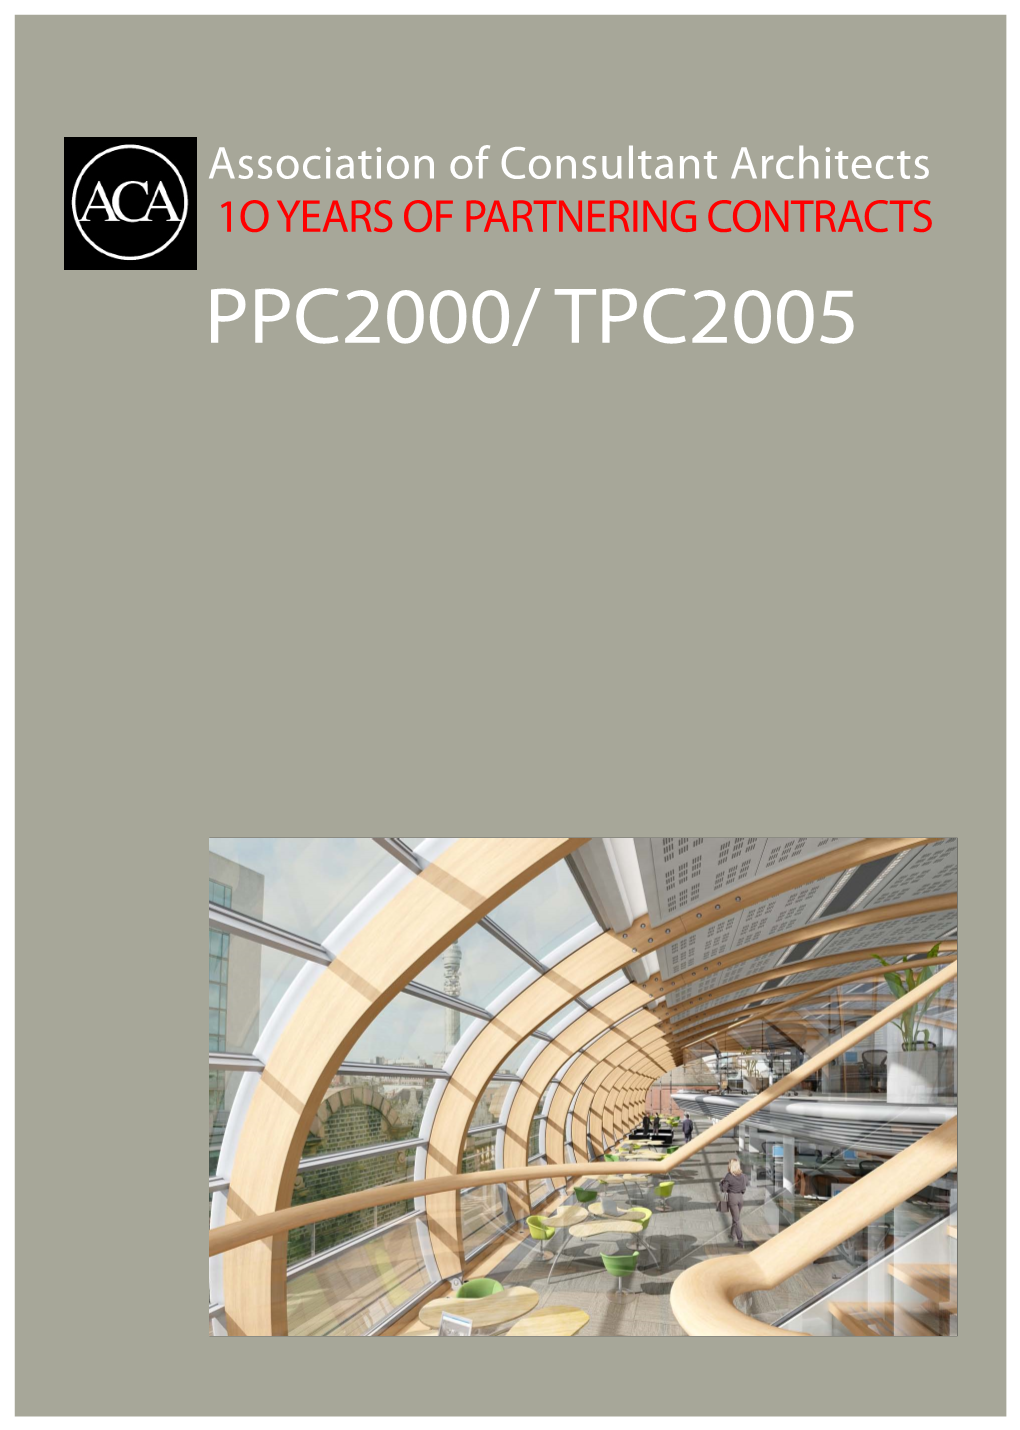 Ppc2000/ Tpc2005 10 Years of Aca Project Partnering Agreements